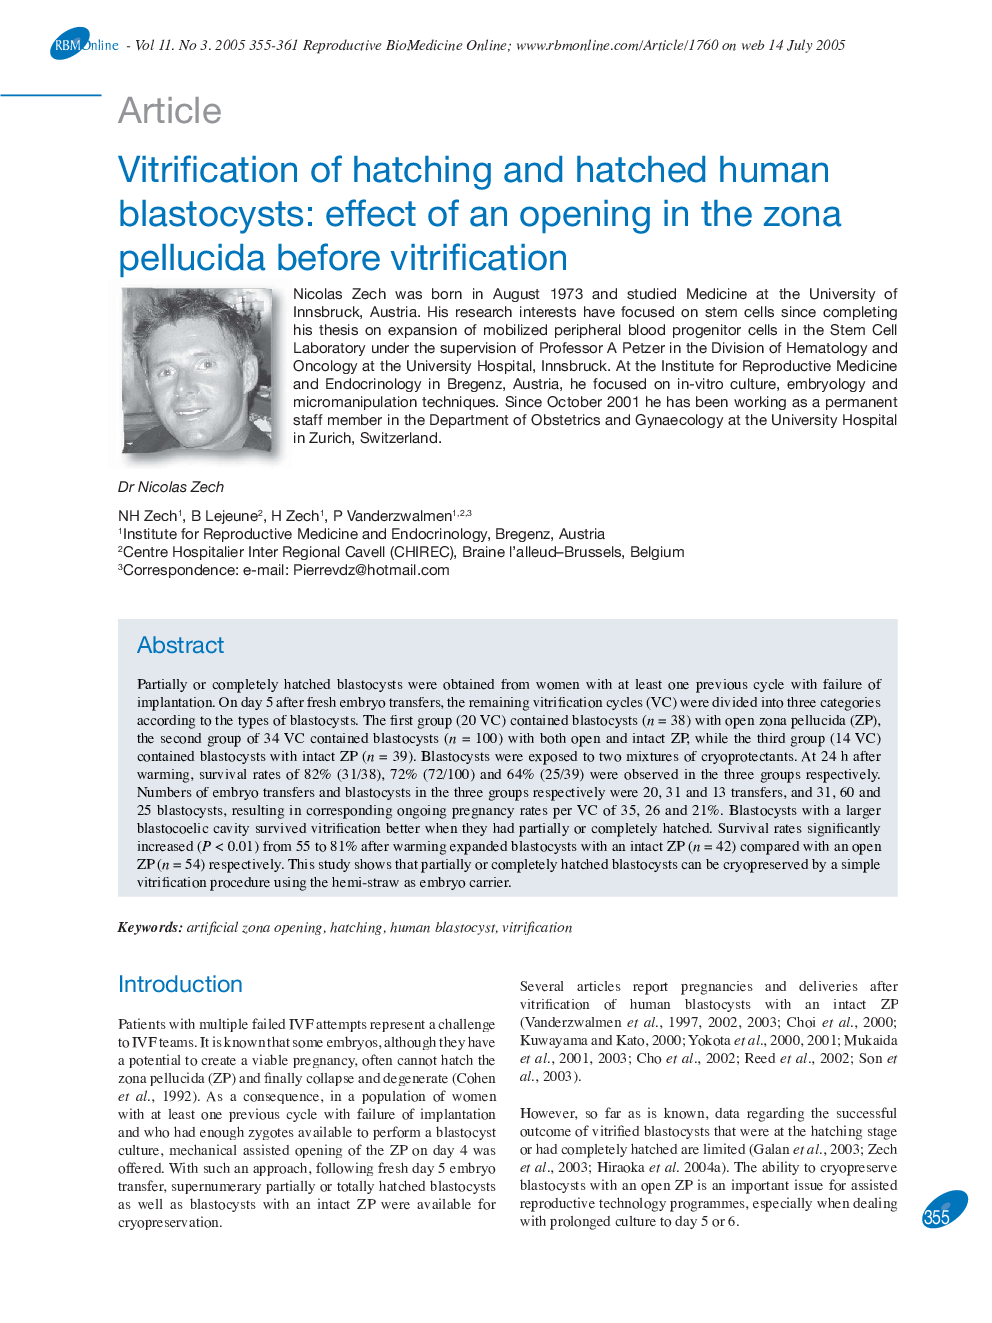 Vitrification of hatching and hatched human blastocysts: effect of an opening in the zona pellucida before vitrification